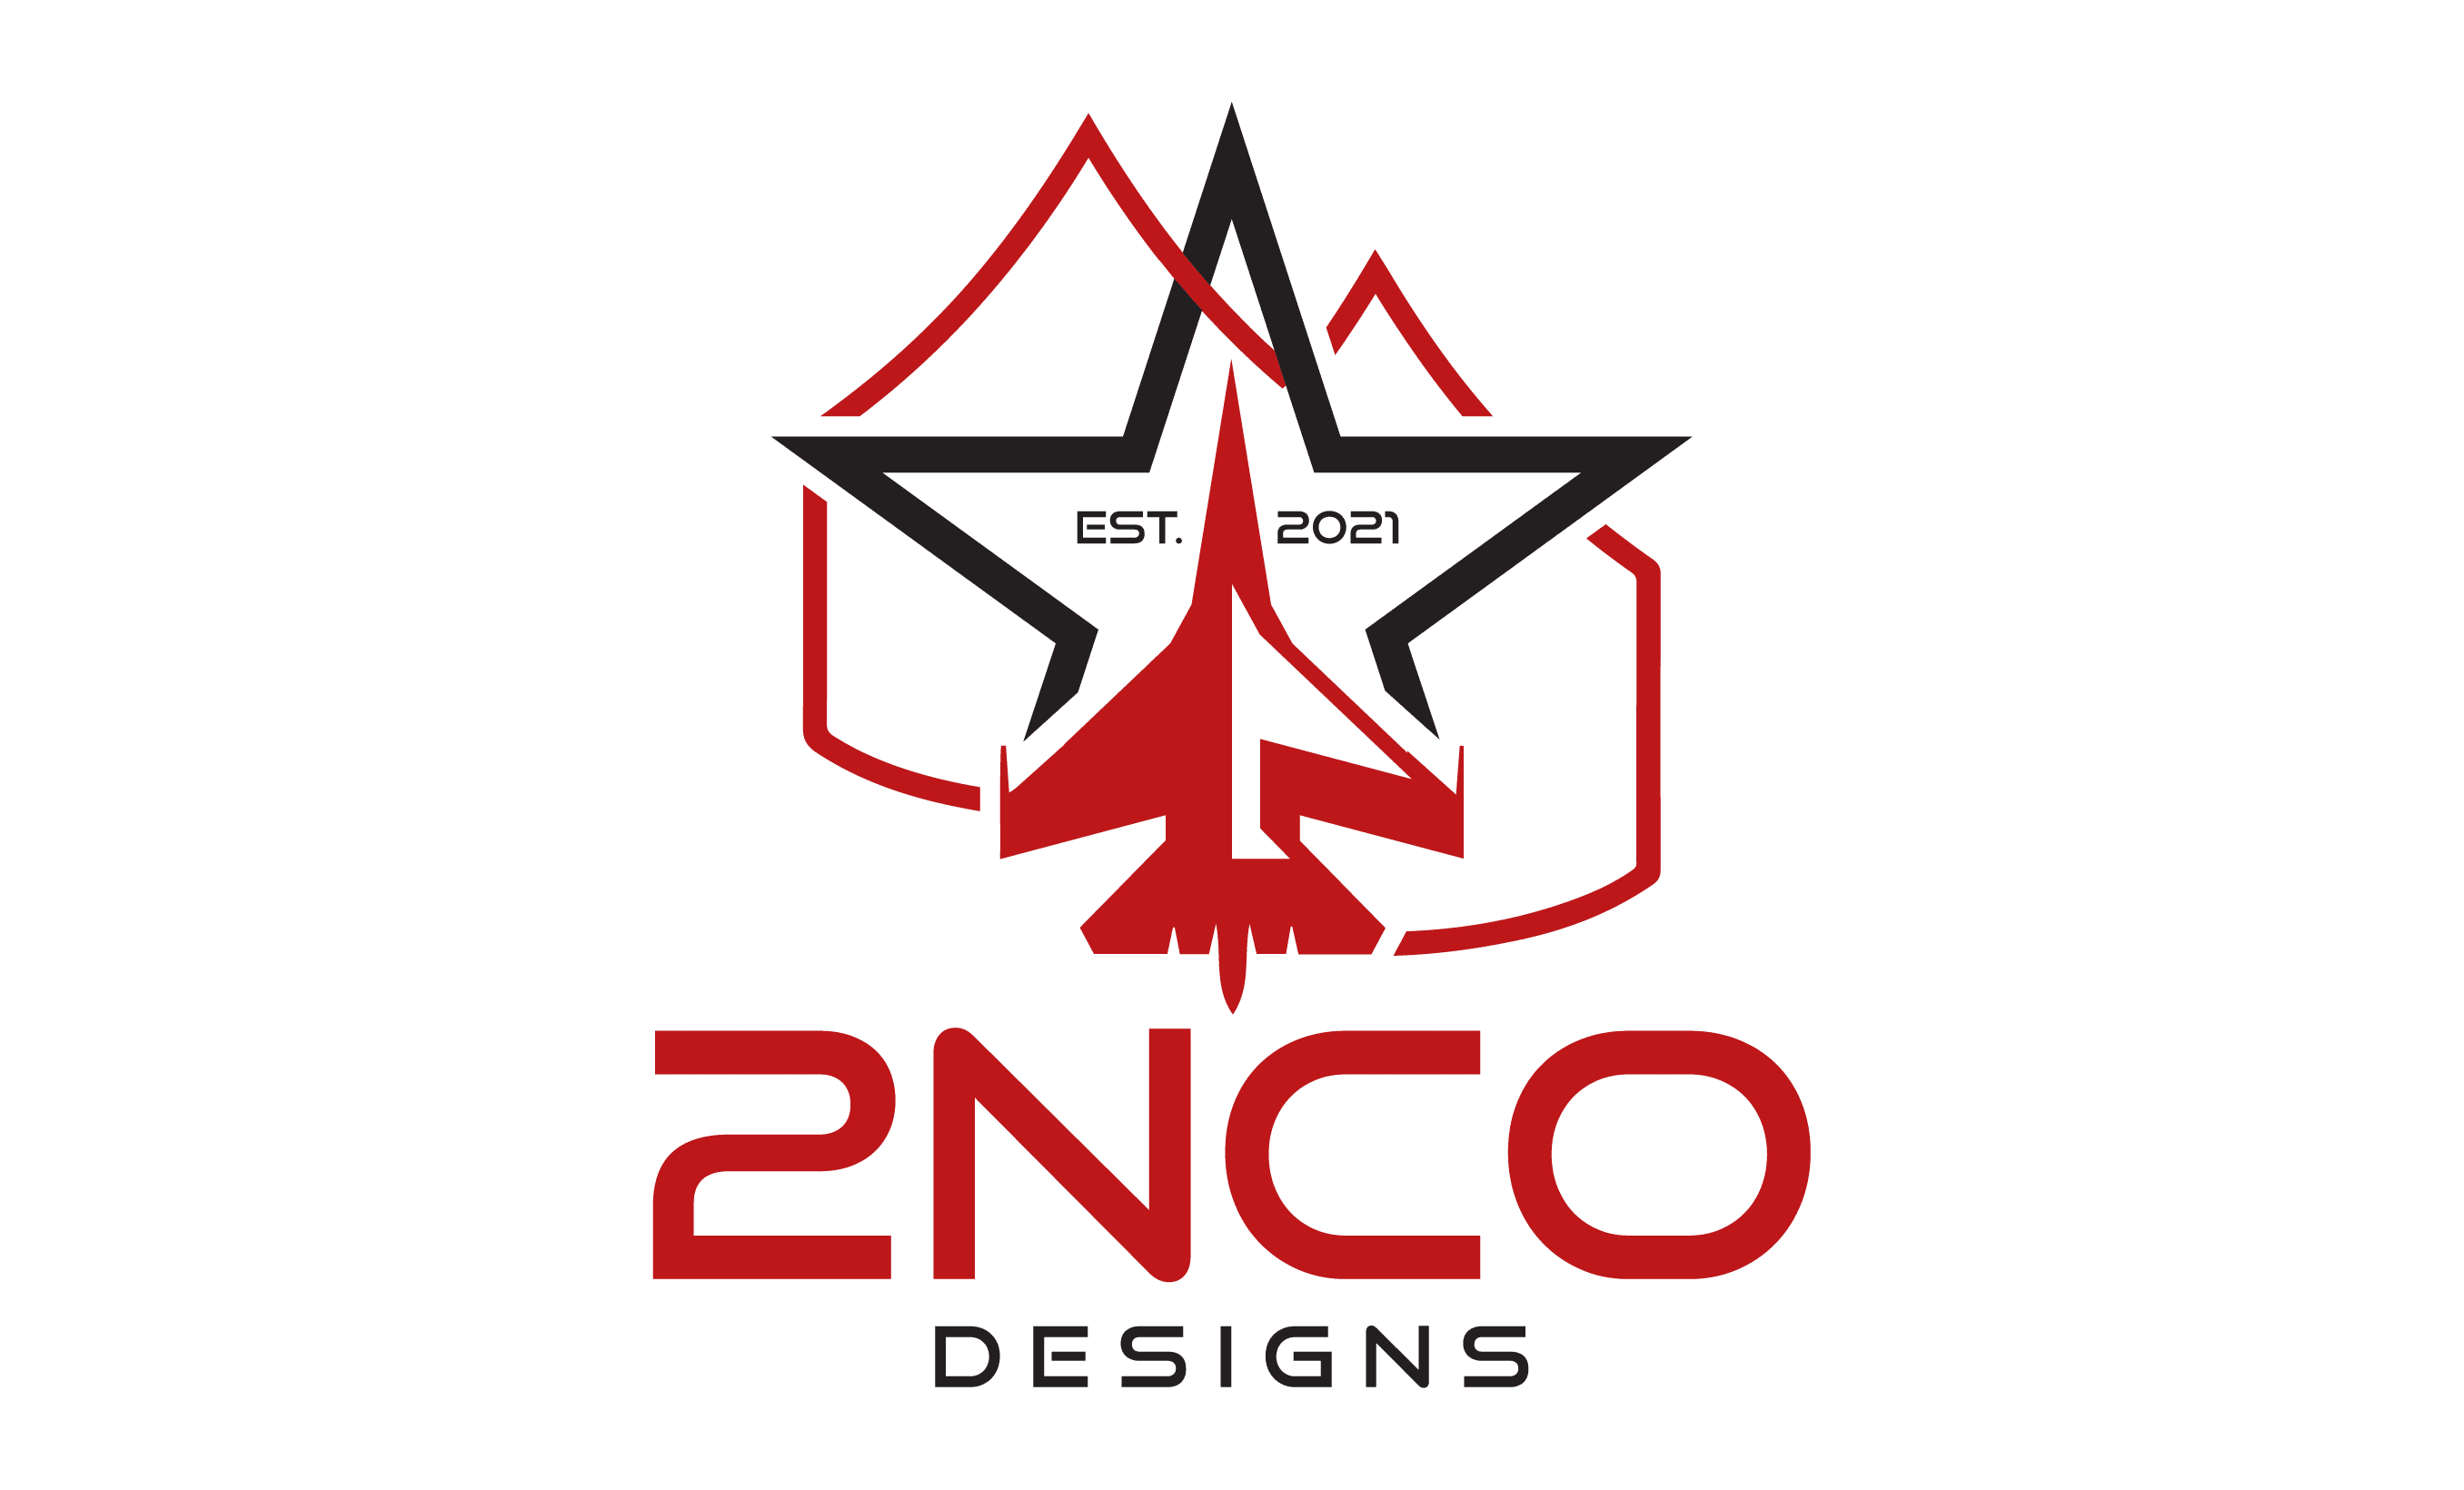 Logo of 2nco designs featuring a stylized black and red tree within a star, with "est. 2021" at the top, on a green background.